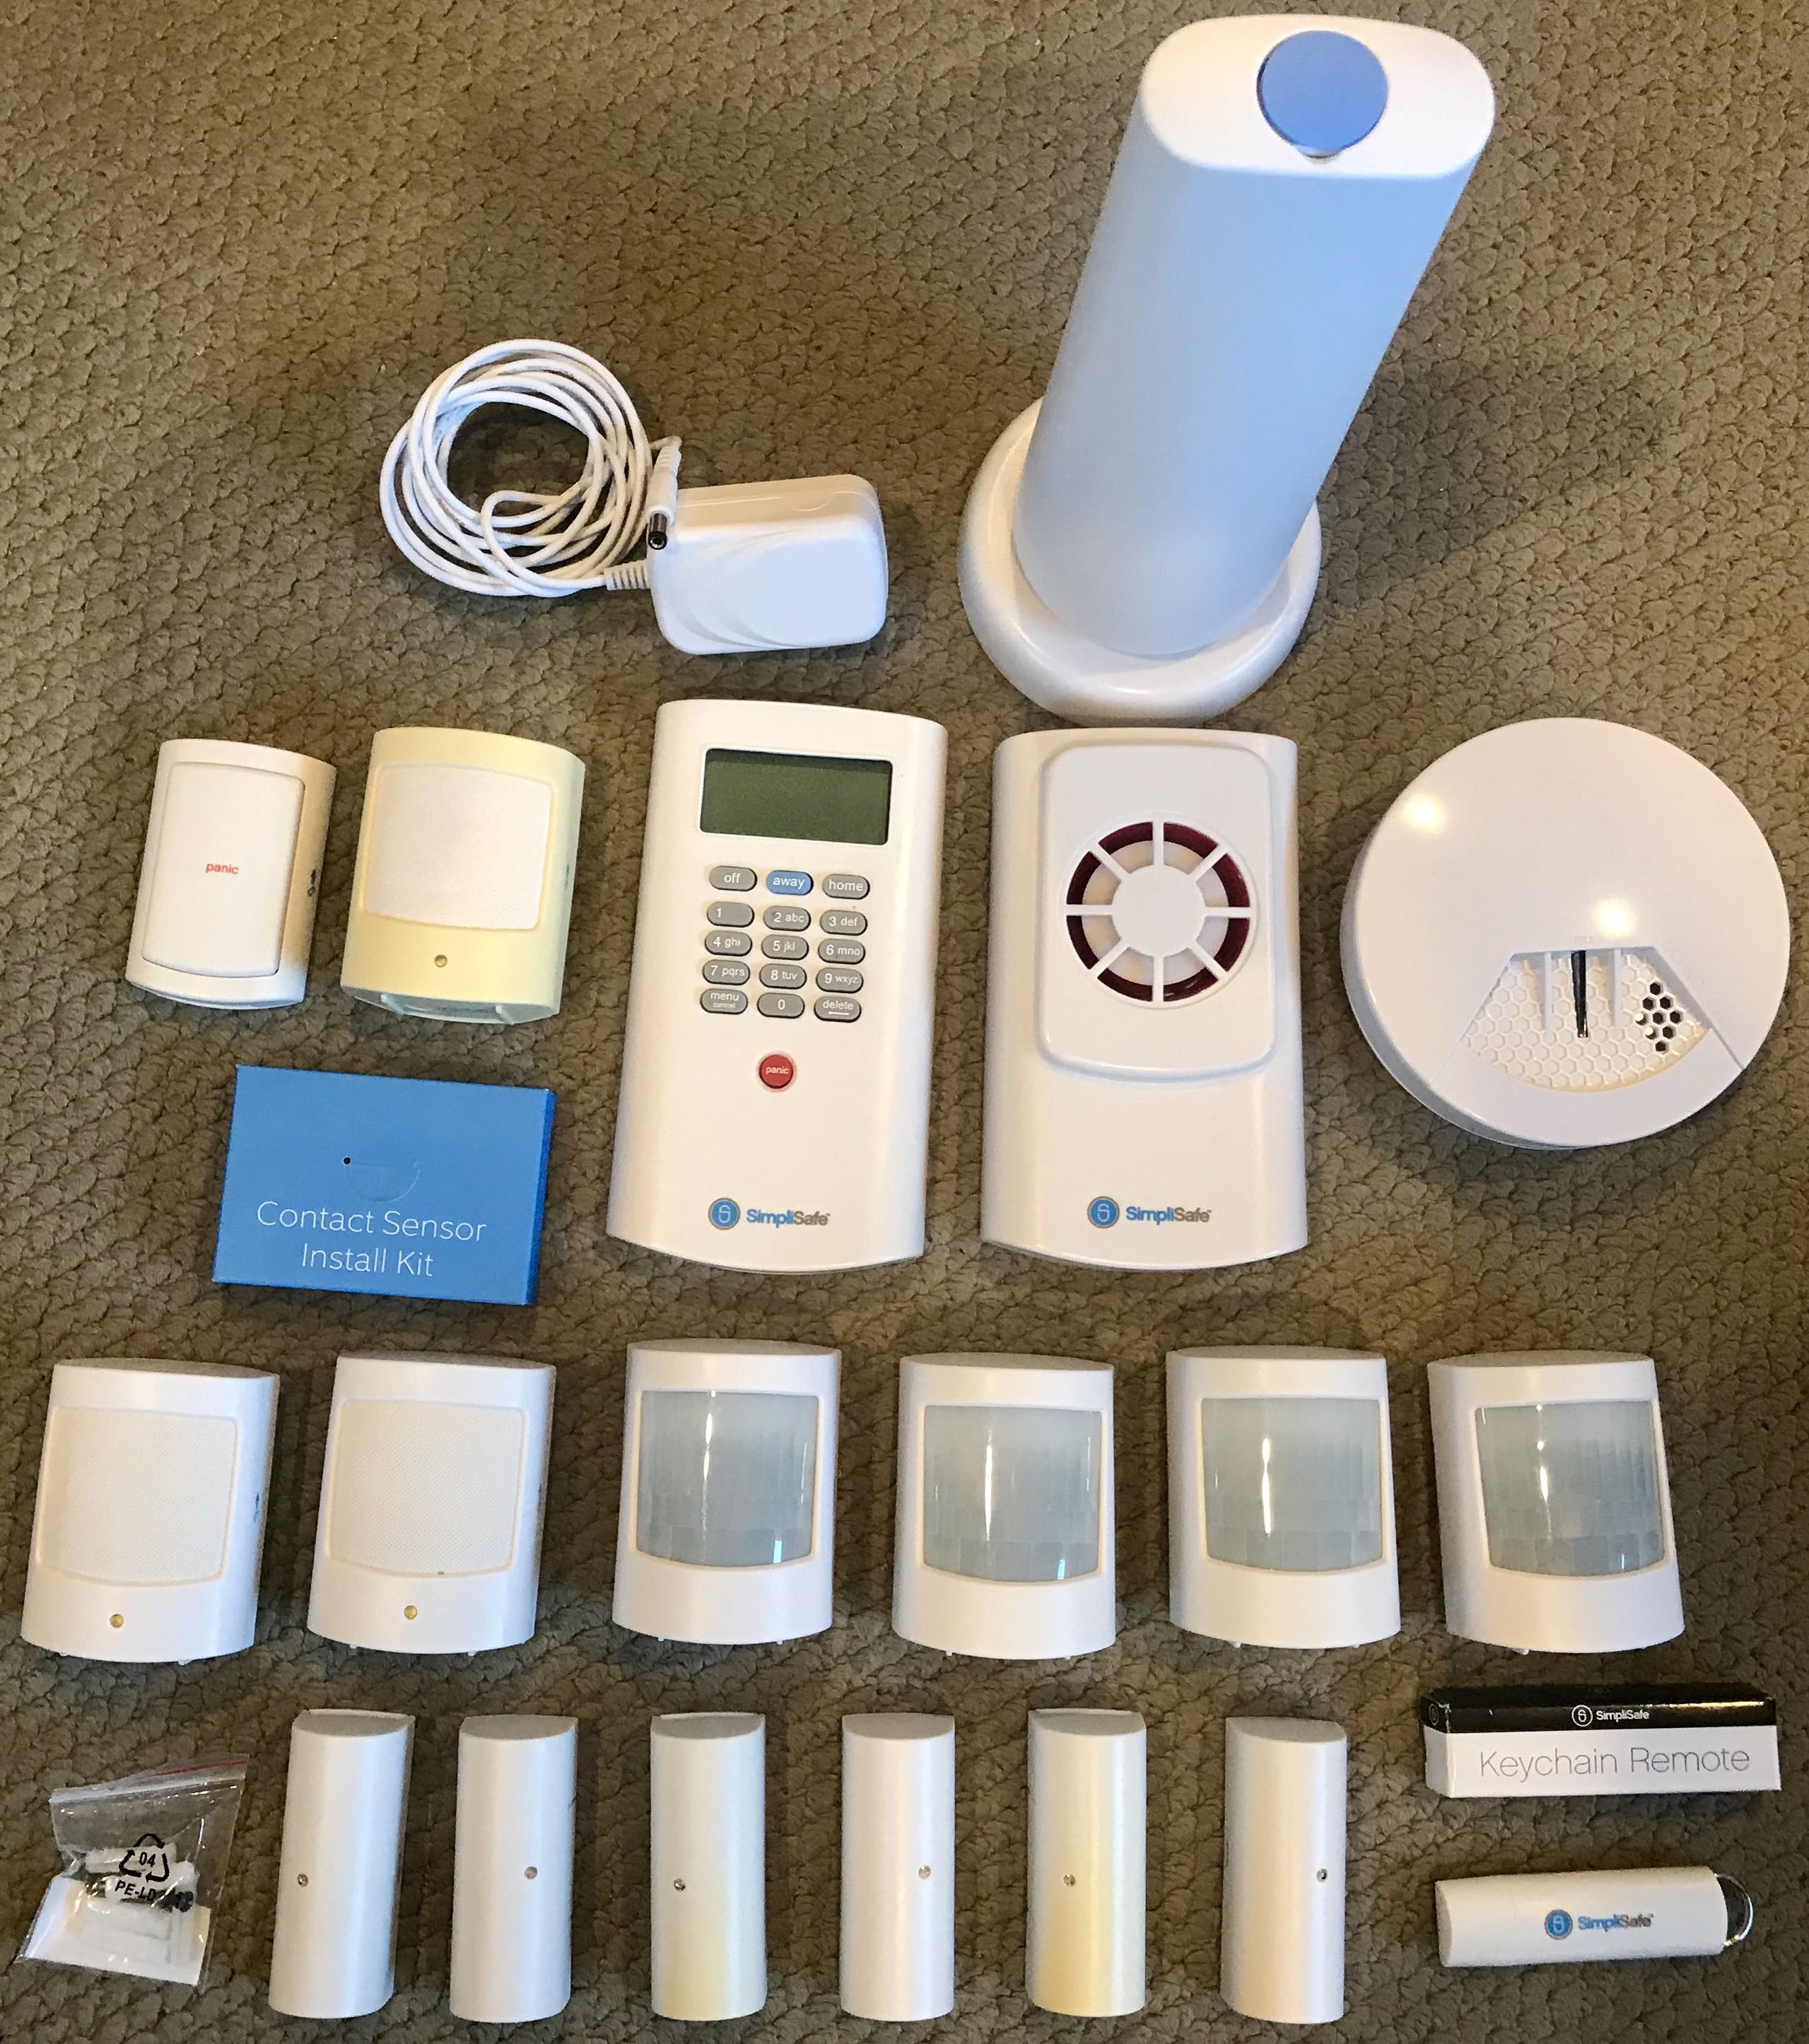 Simplisafe Wireless Deluxe Home Alarm Security System 20 Pieces